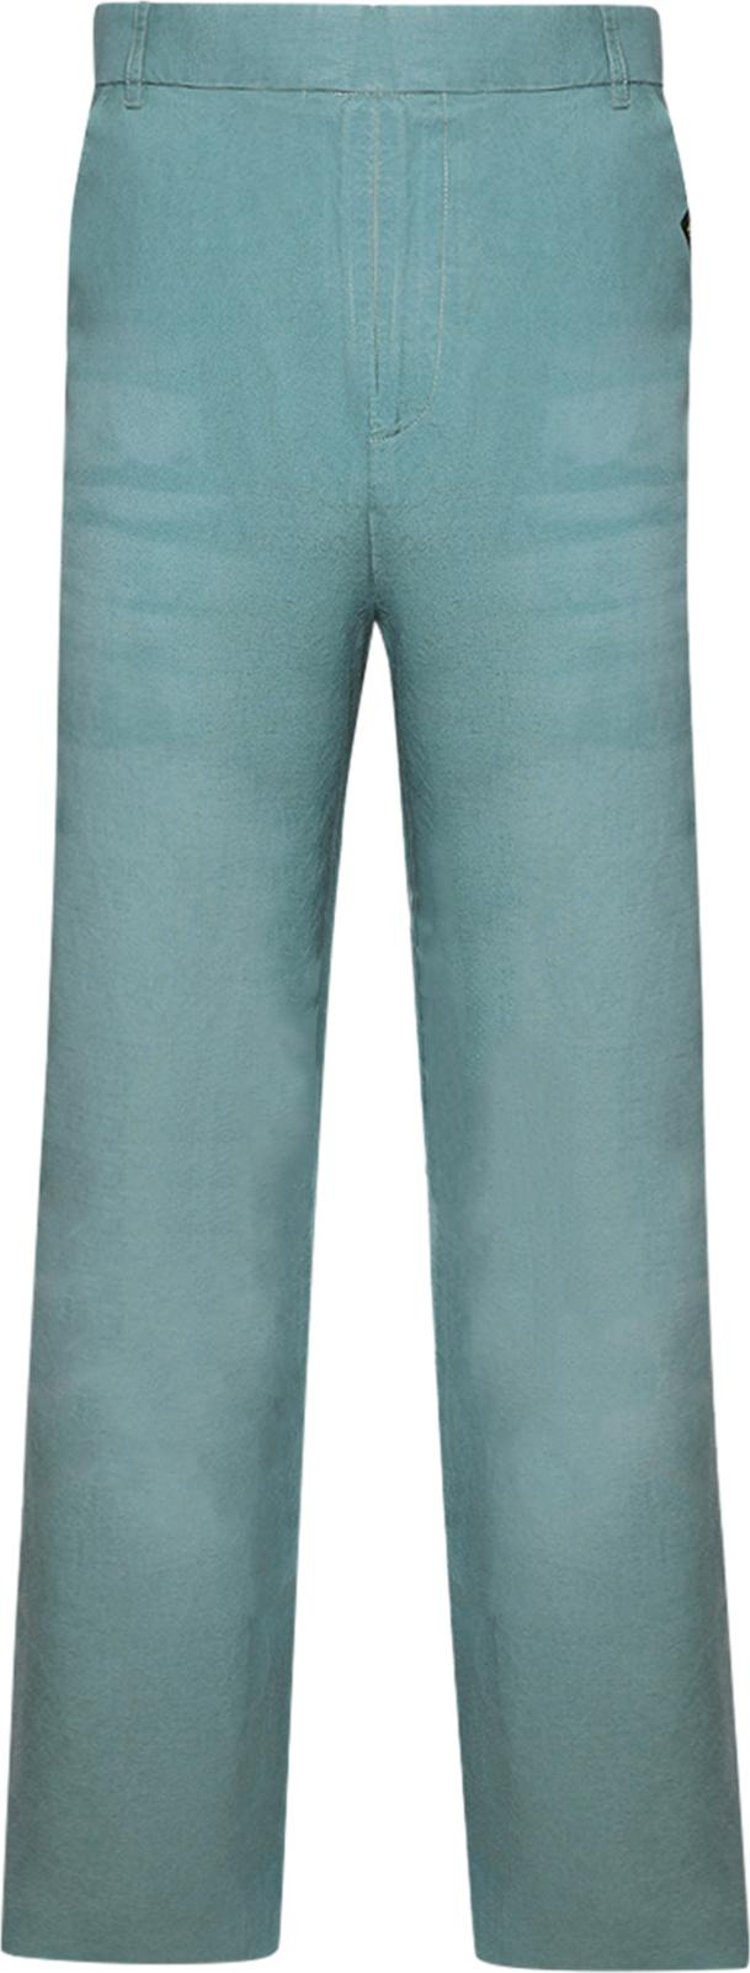 Martine Rose Tailored Extended Wide Leg Trouser 'Teal/Sunbleach'